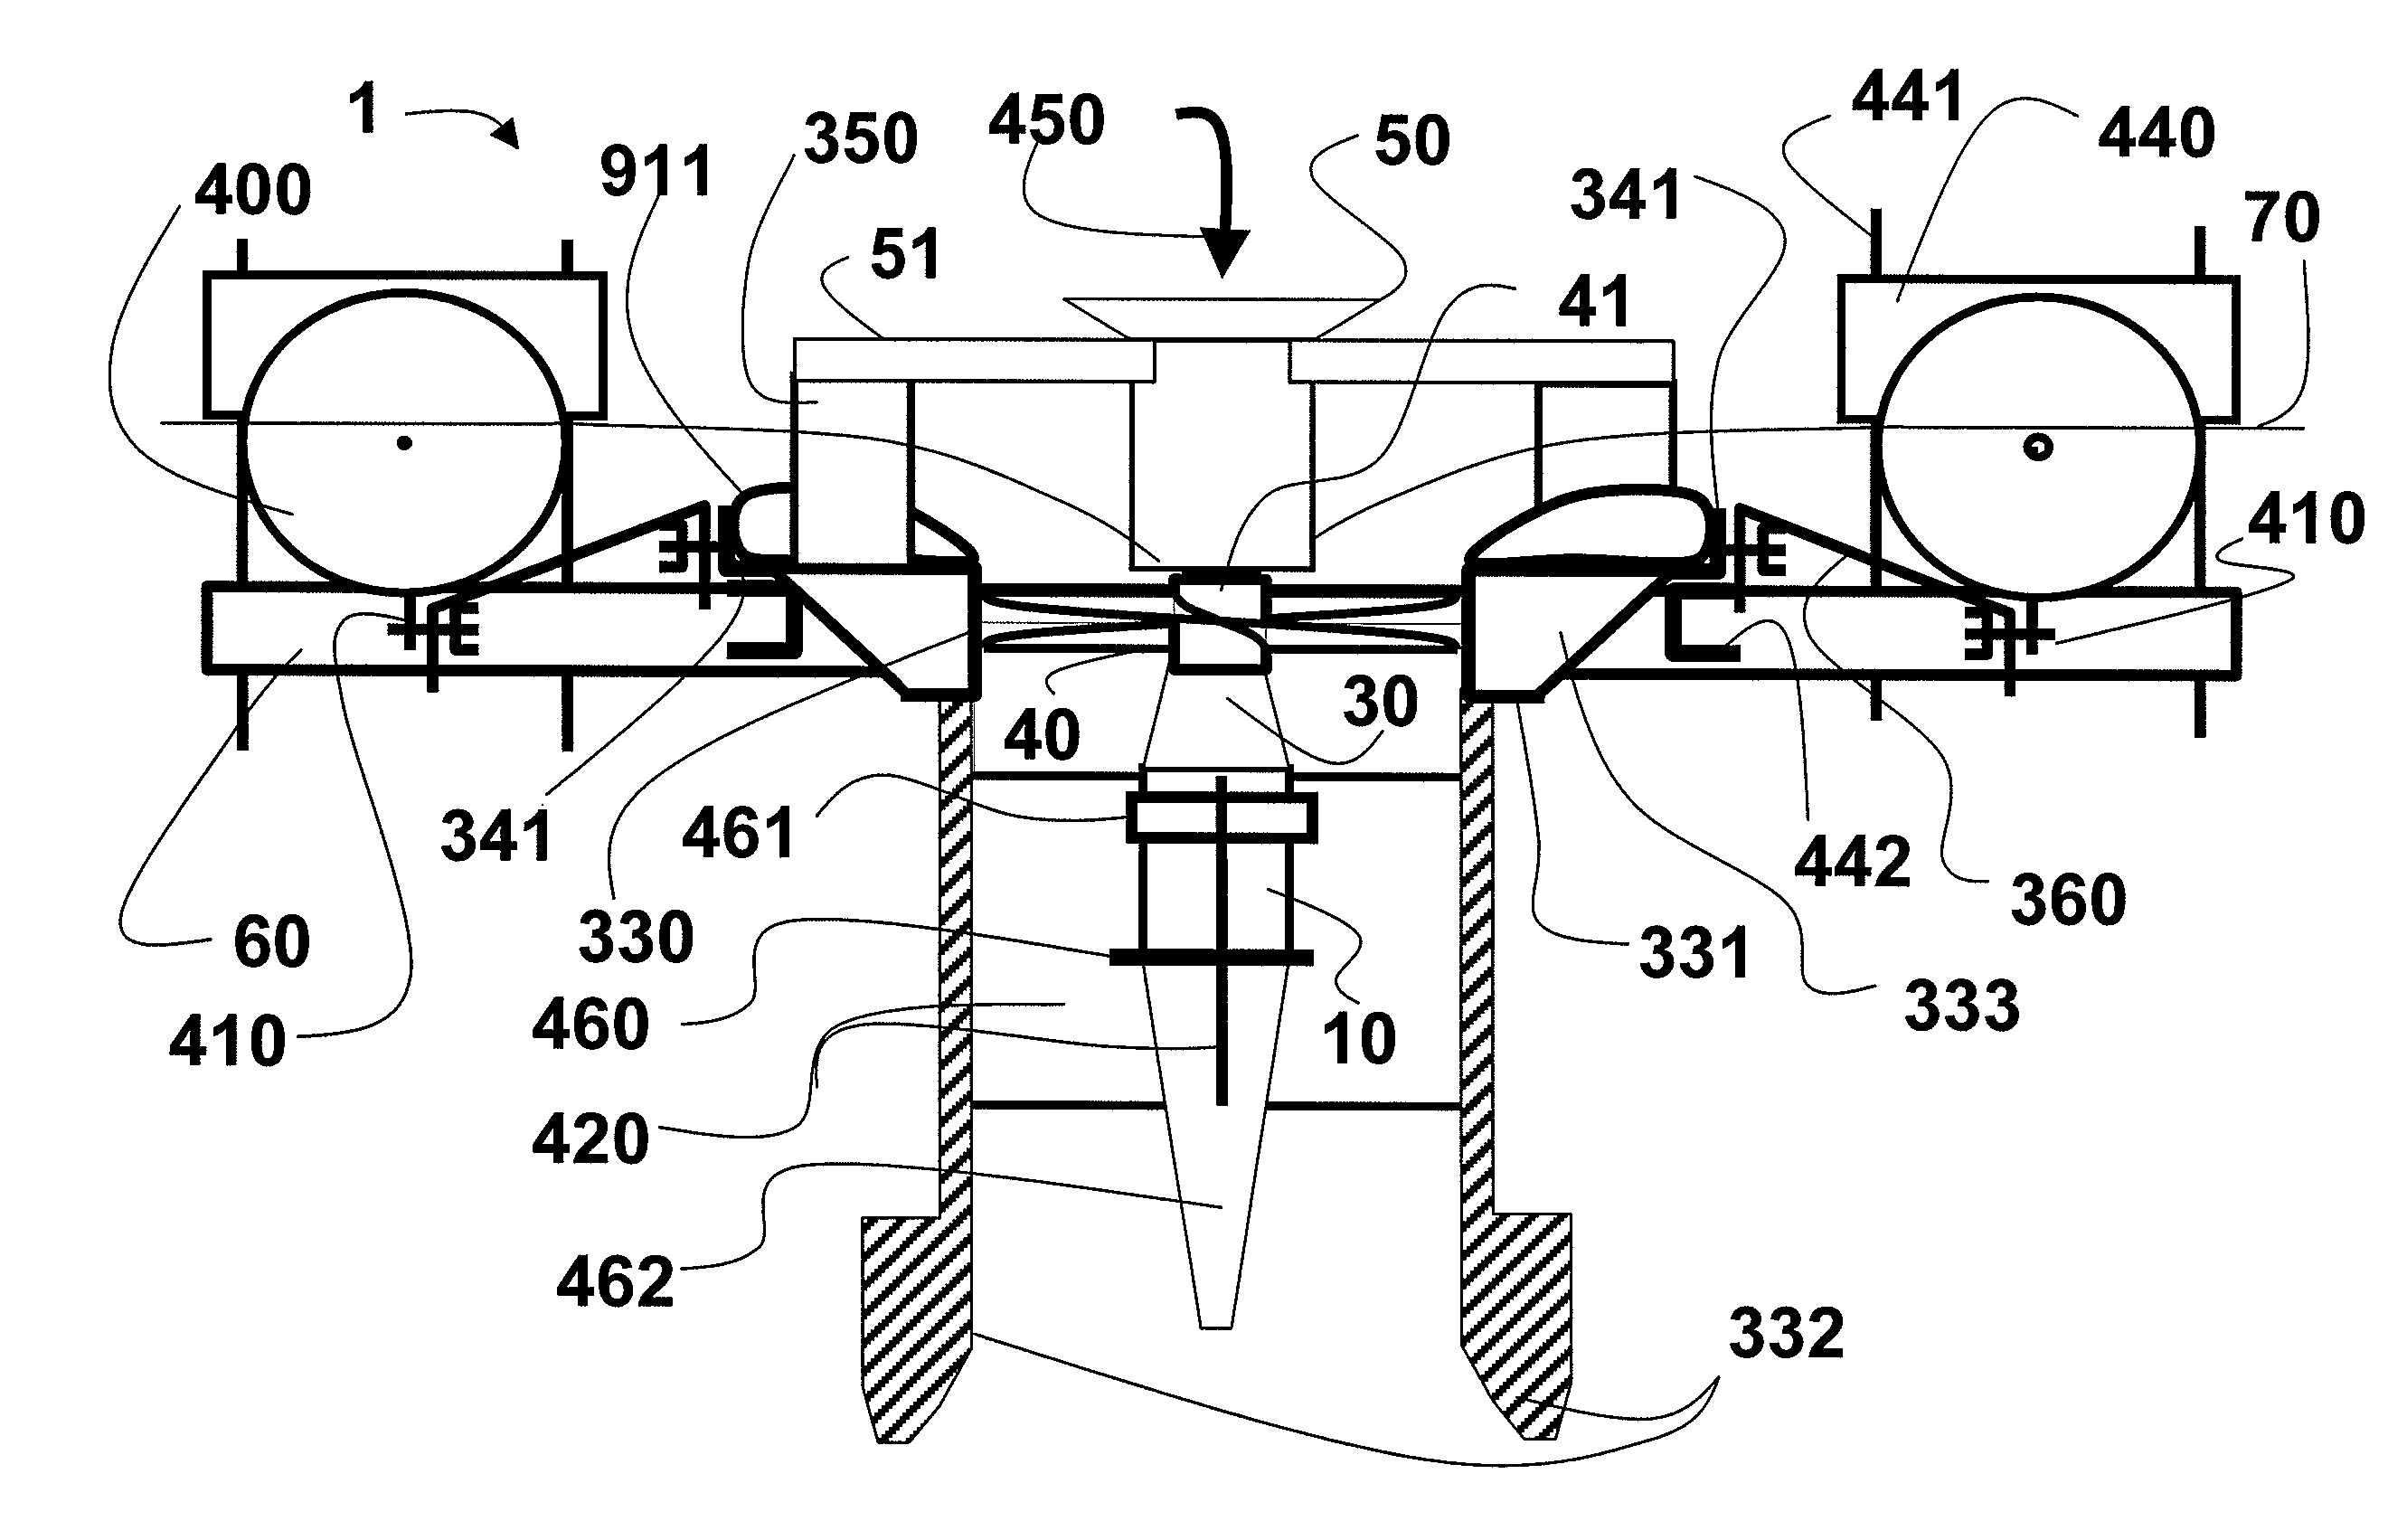 Apparatus for mixing gasses and liquids